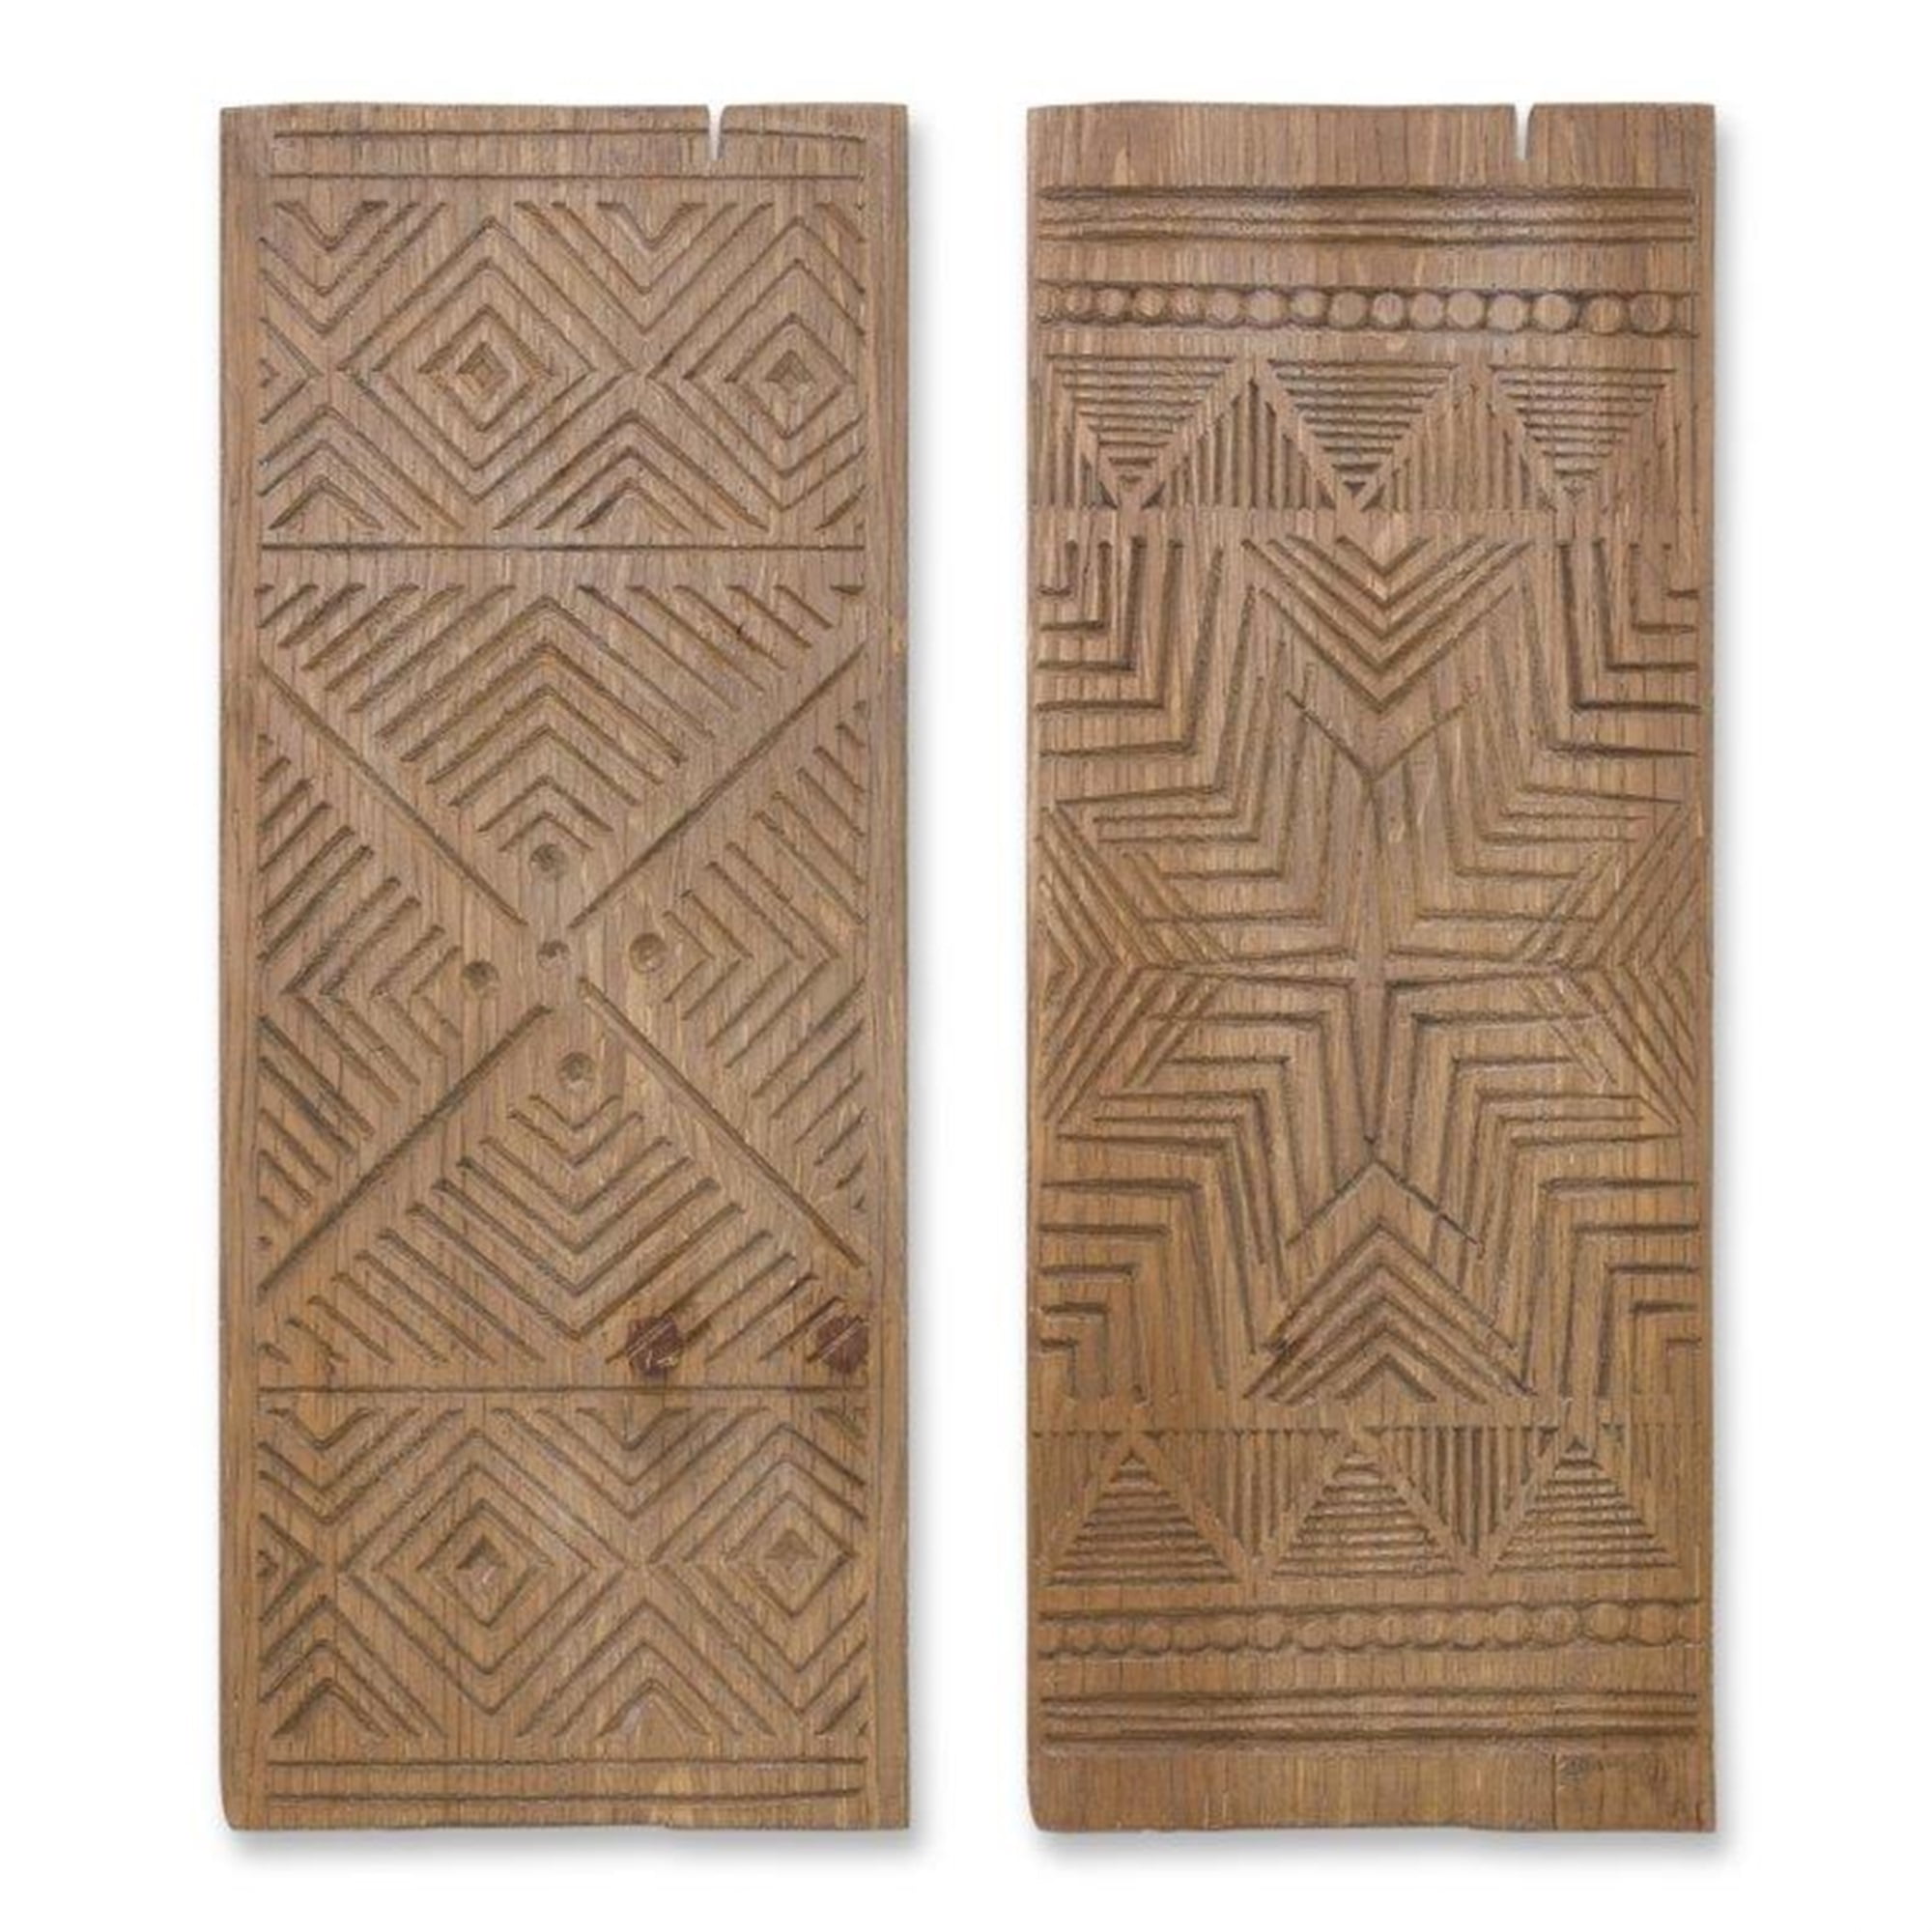 Wood Carving Wall Plaque (Set of 2) 11"L x 28"H Wood